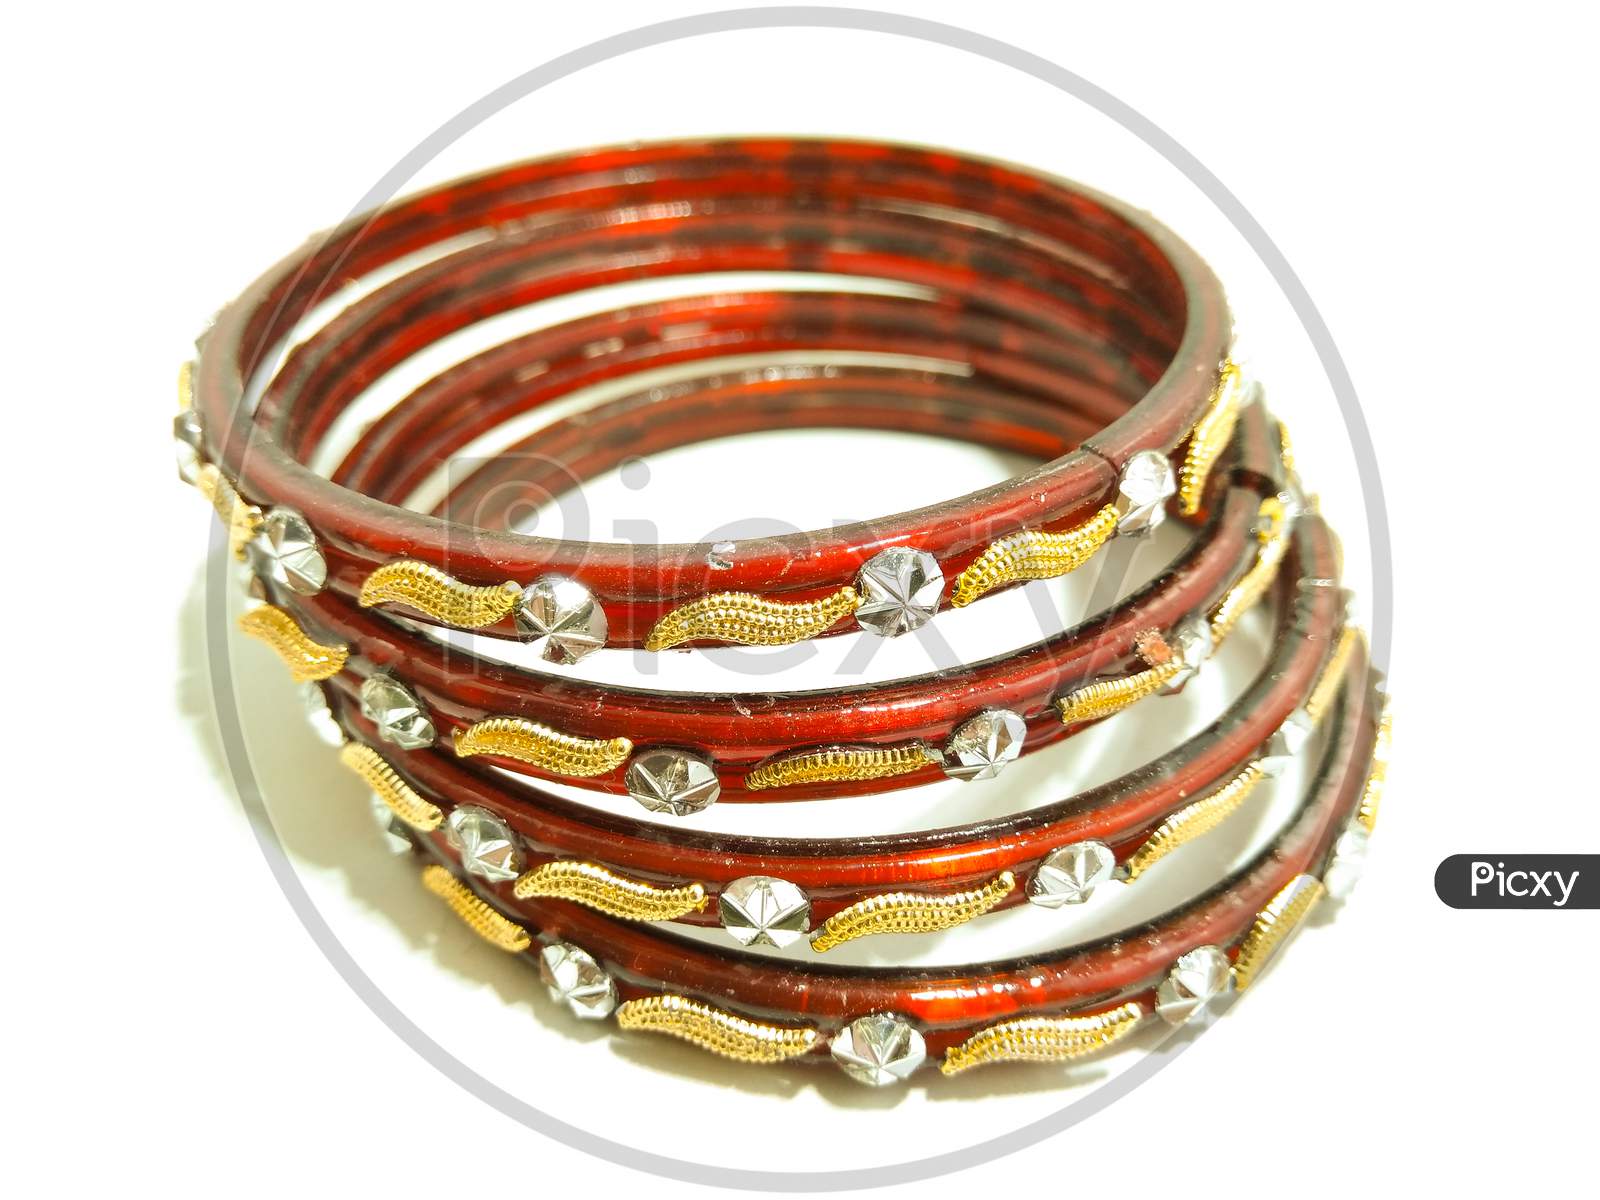 A picture of bangles